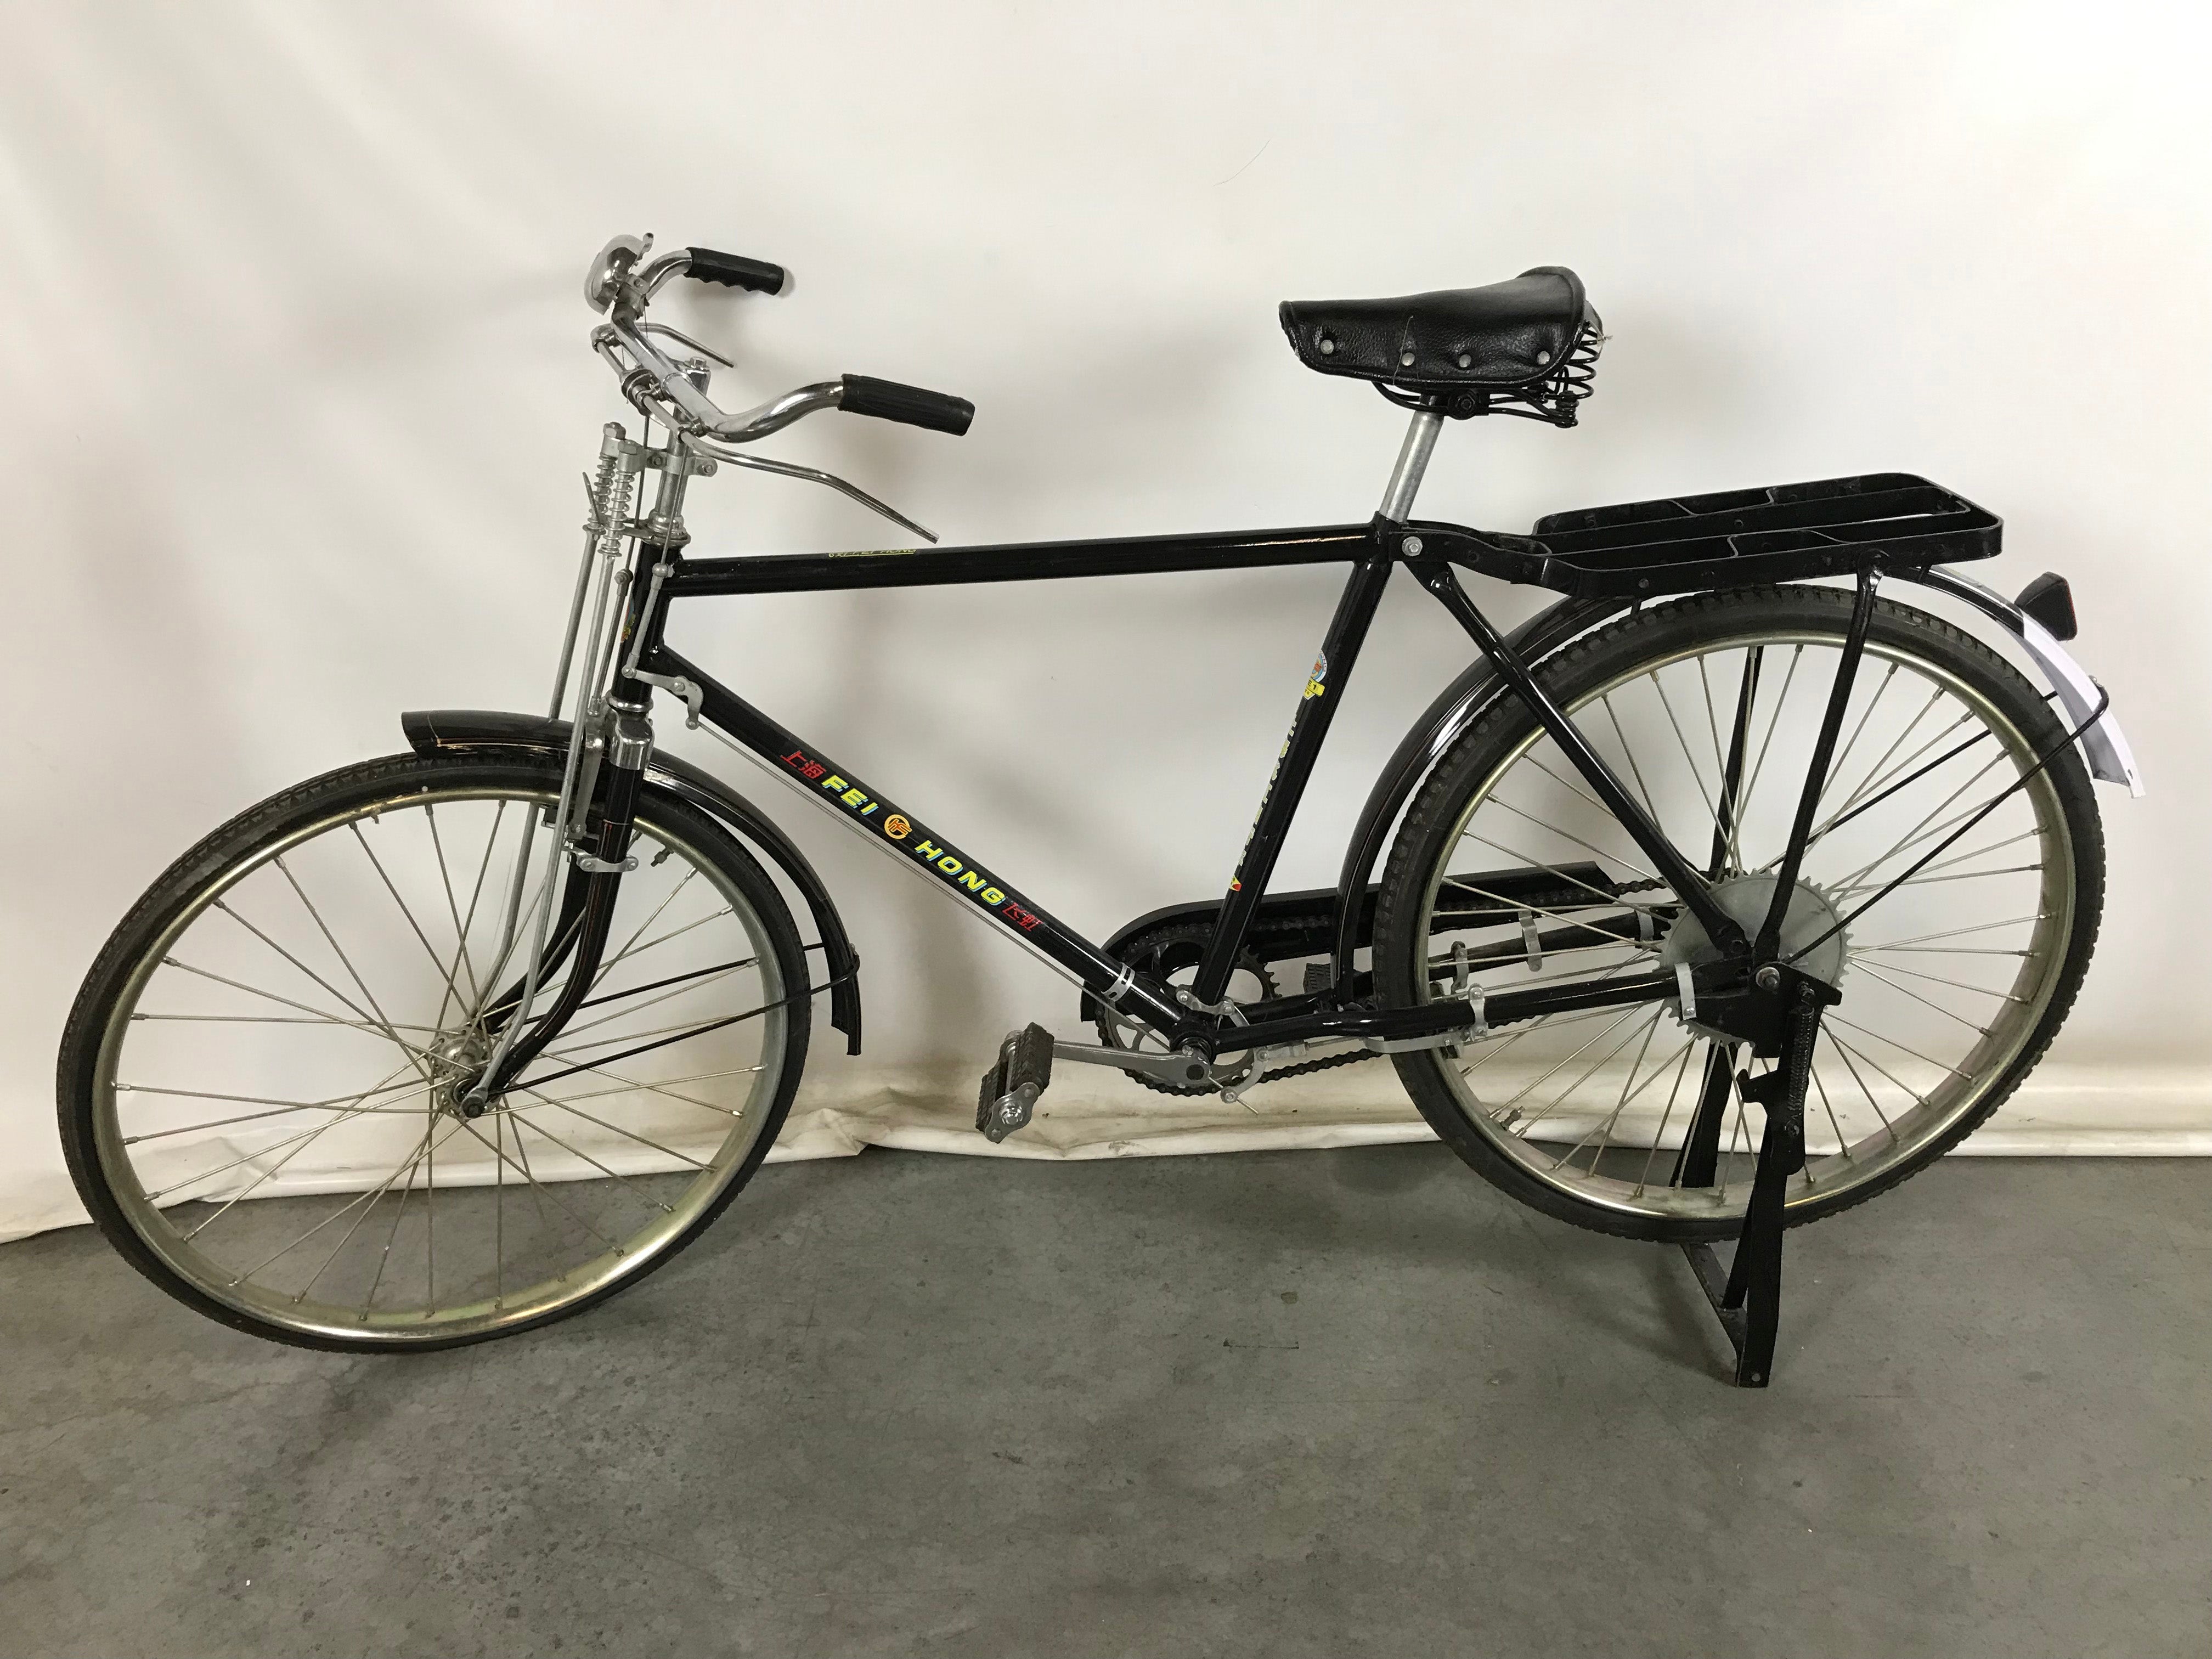 FEI HONG Work Bike with Motorized Parts